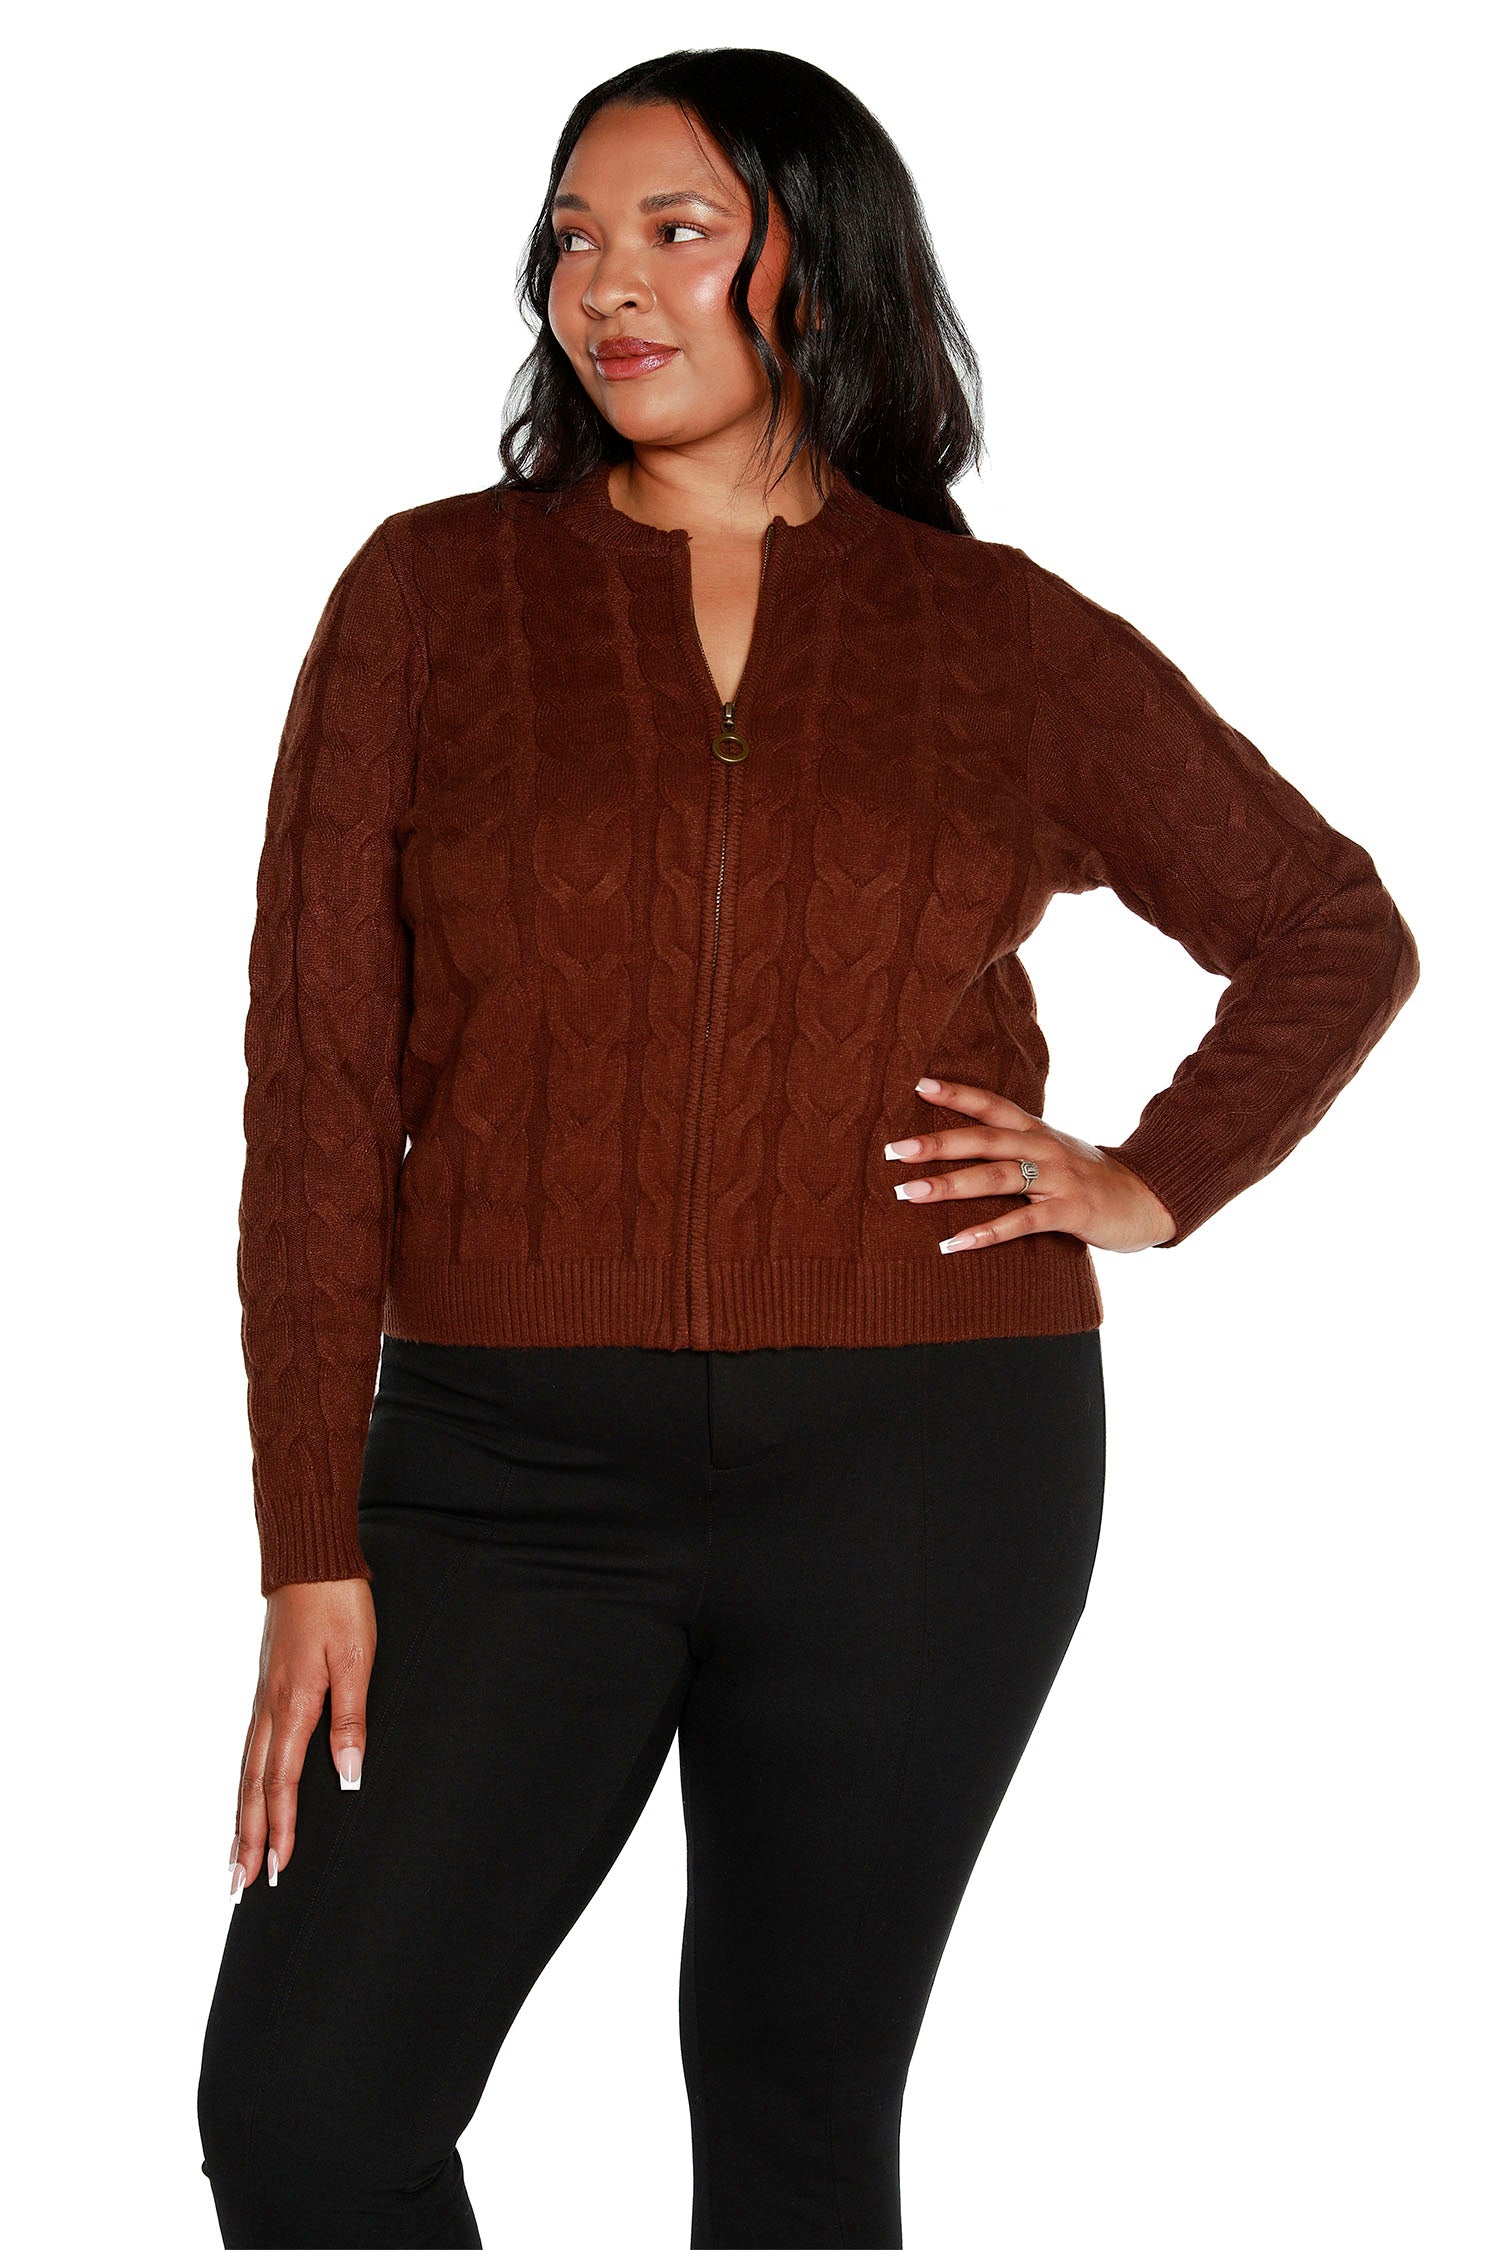 NEW COLORS Women's Cable Knit Zip Up Cardigan  | Curvy